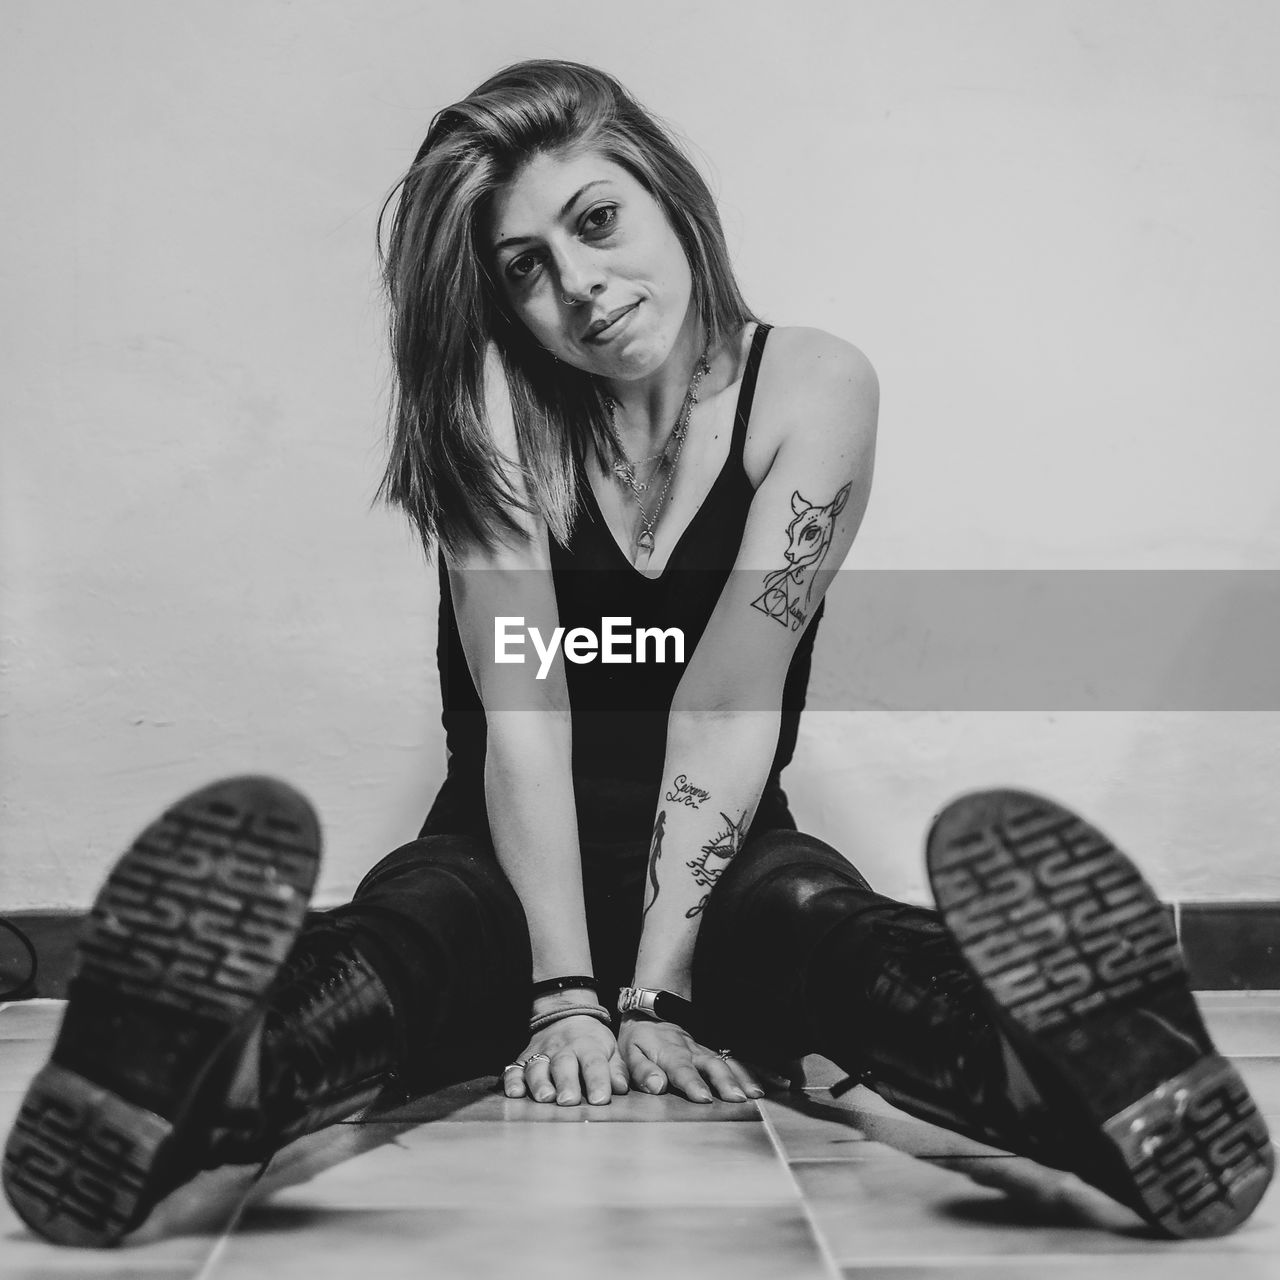 sitting, one person, black, adult, women, black and white, footwear, young adult, portrait, white, monochrome, monochrome photography, indoors, long hair, photo shoot, hairstyle, lifestyles, limb, looking at camera, person, full length, shoe, human leg, female, fashion, front view, clothing, casual clothing, arts culture and entertainment, leisure activity, studio shot